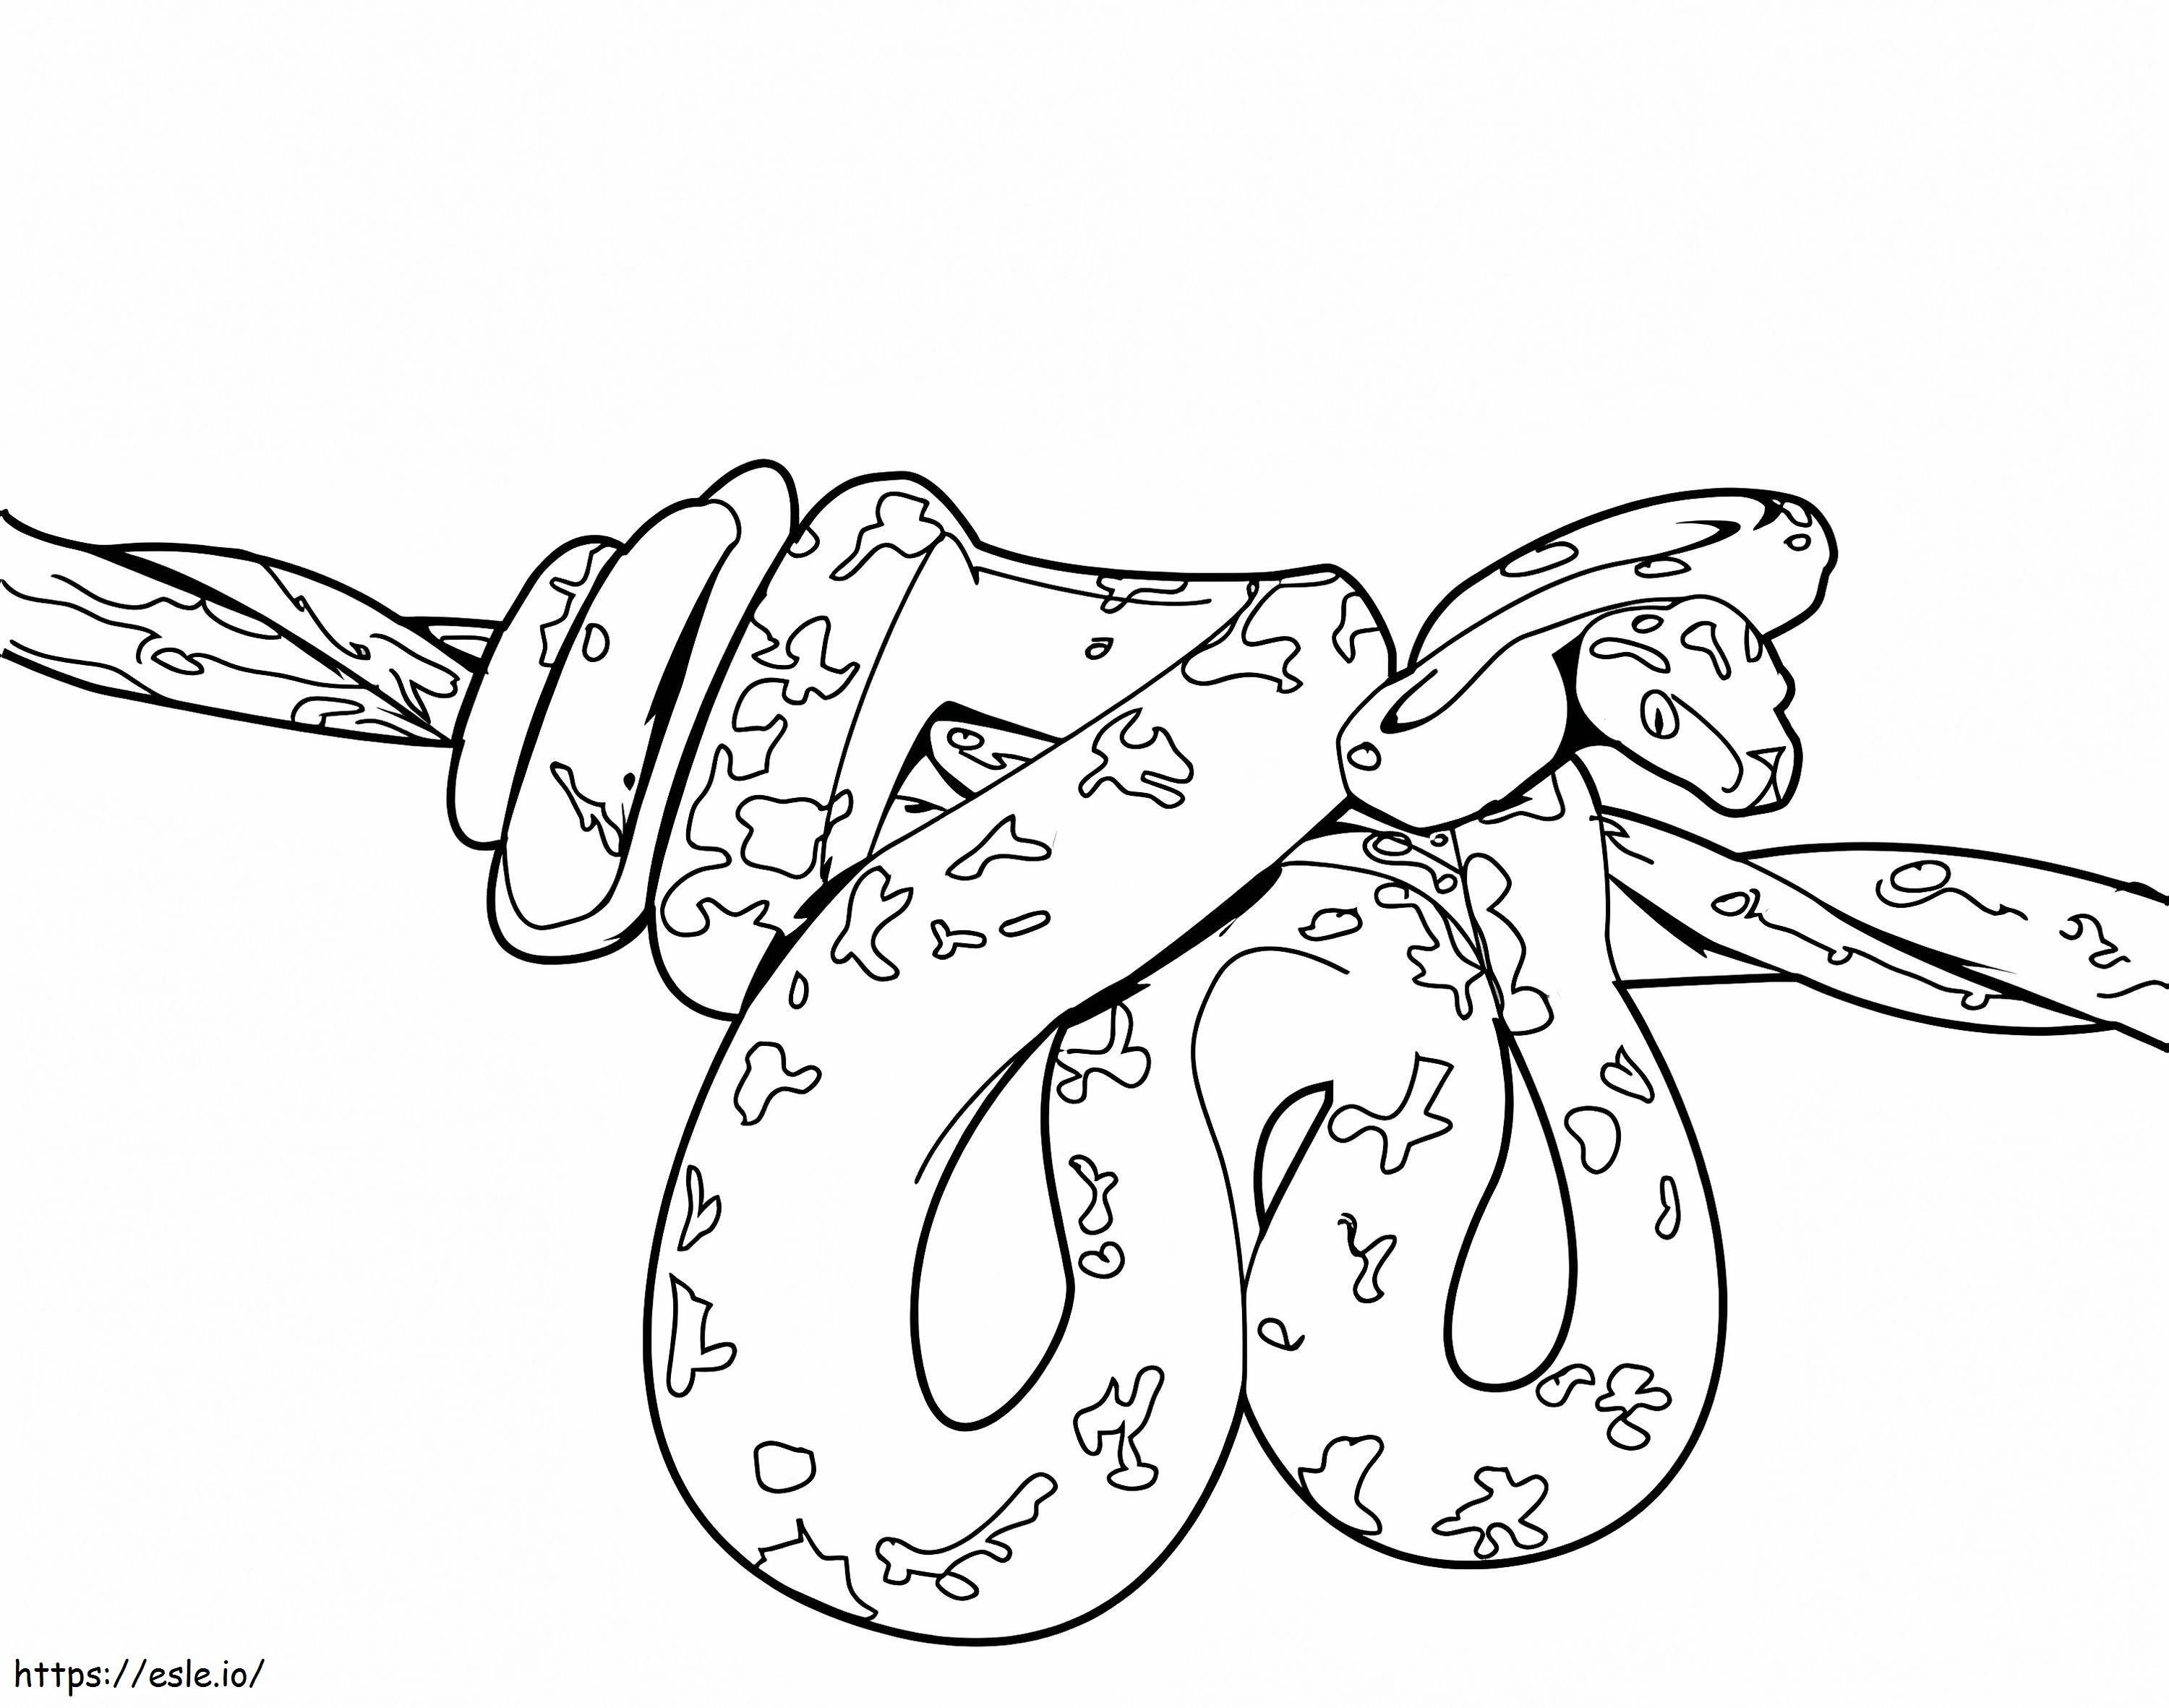 Python On A Tree Branch coloring page